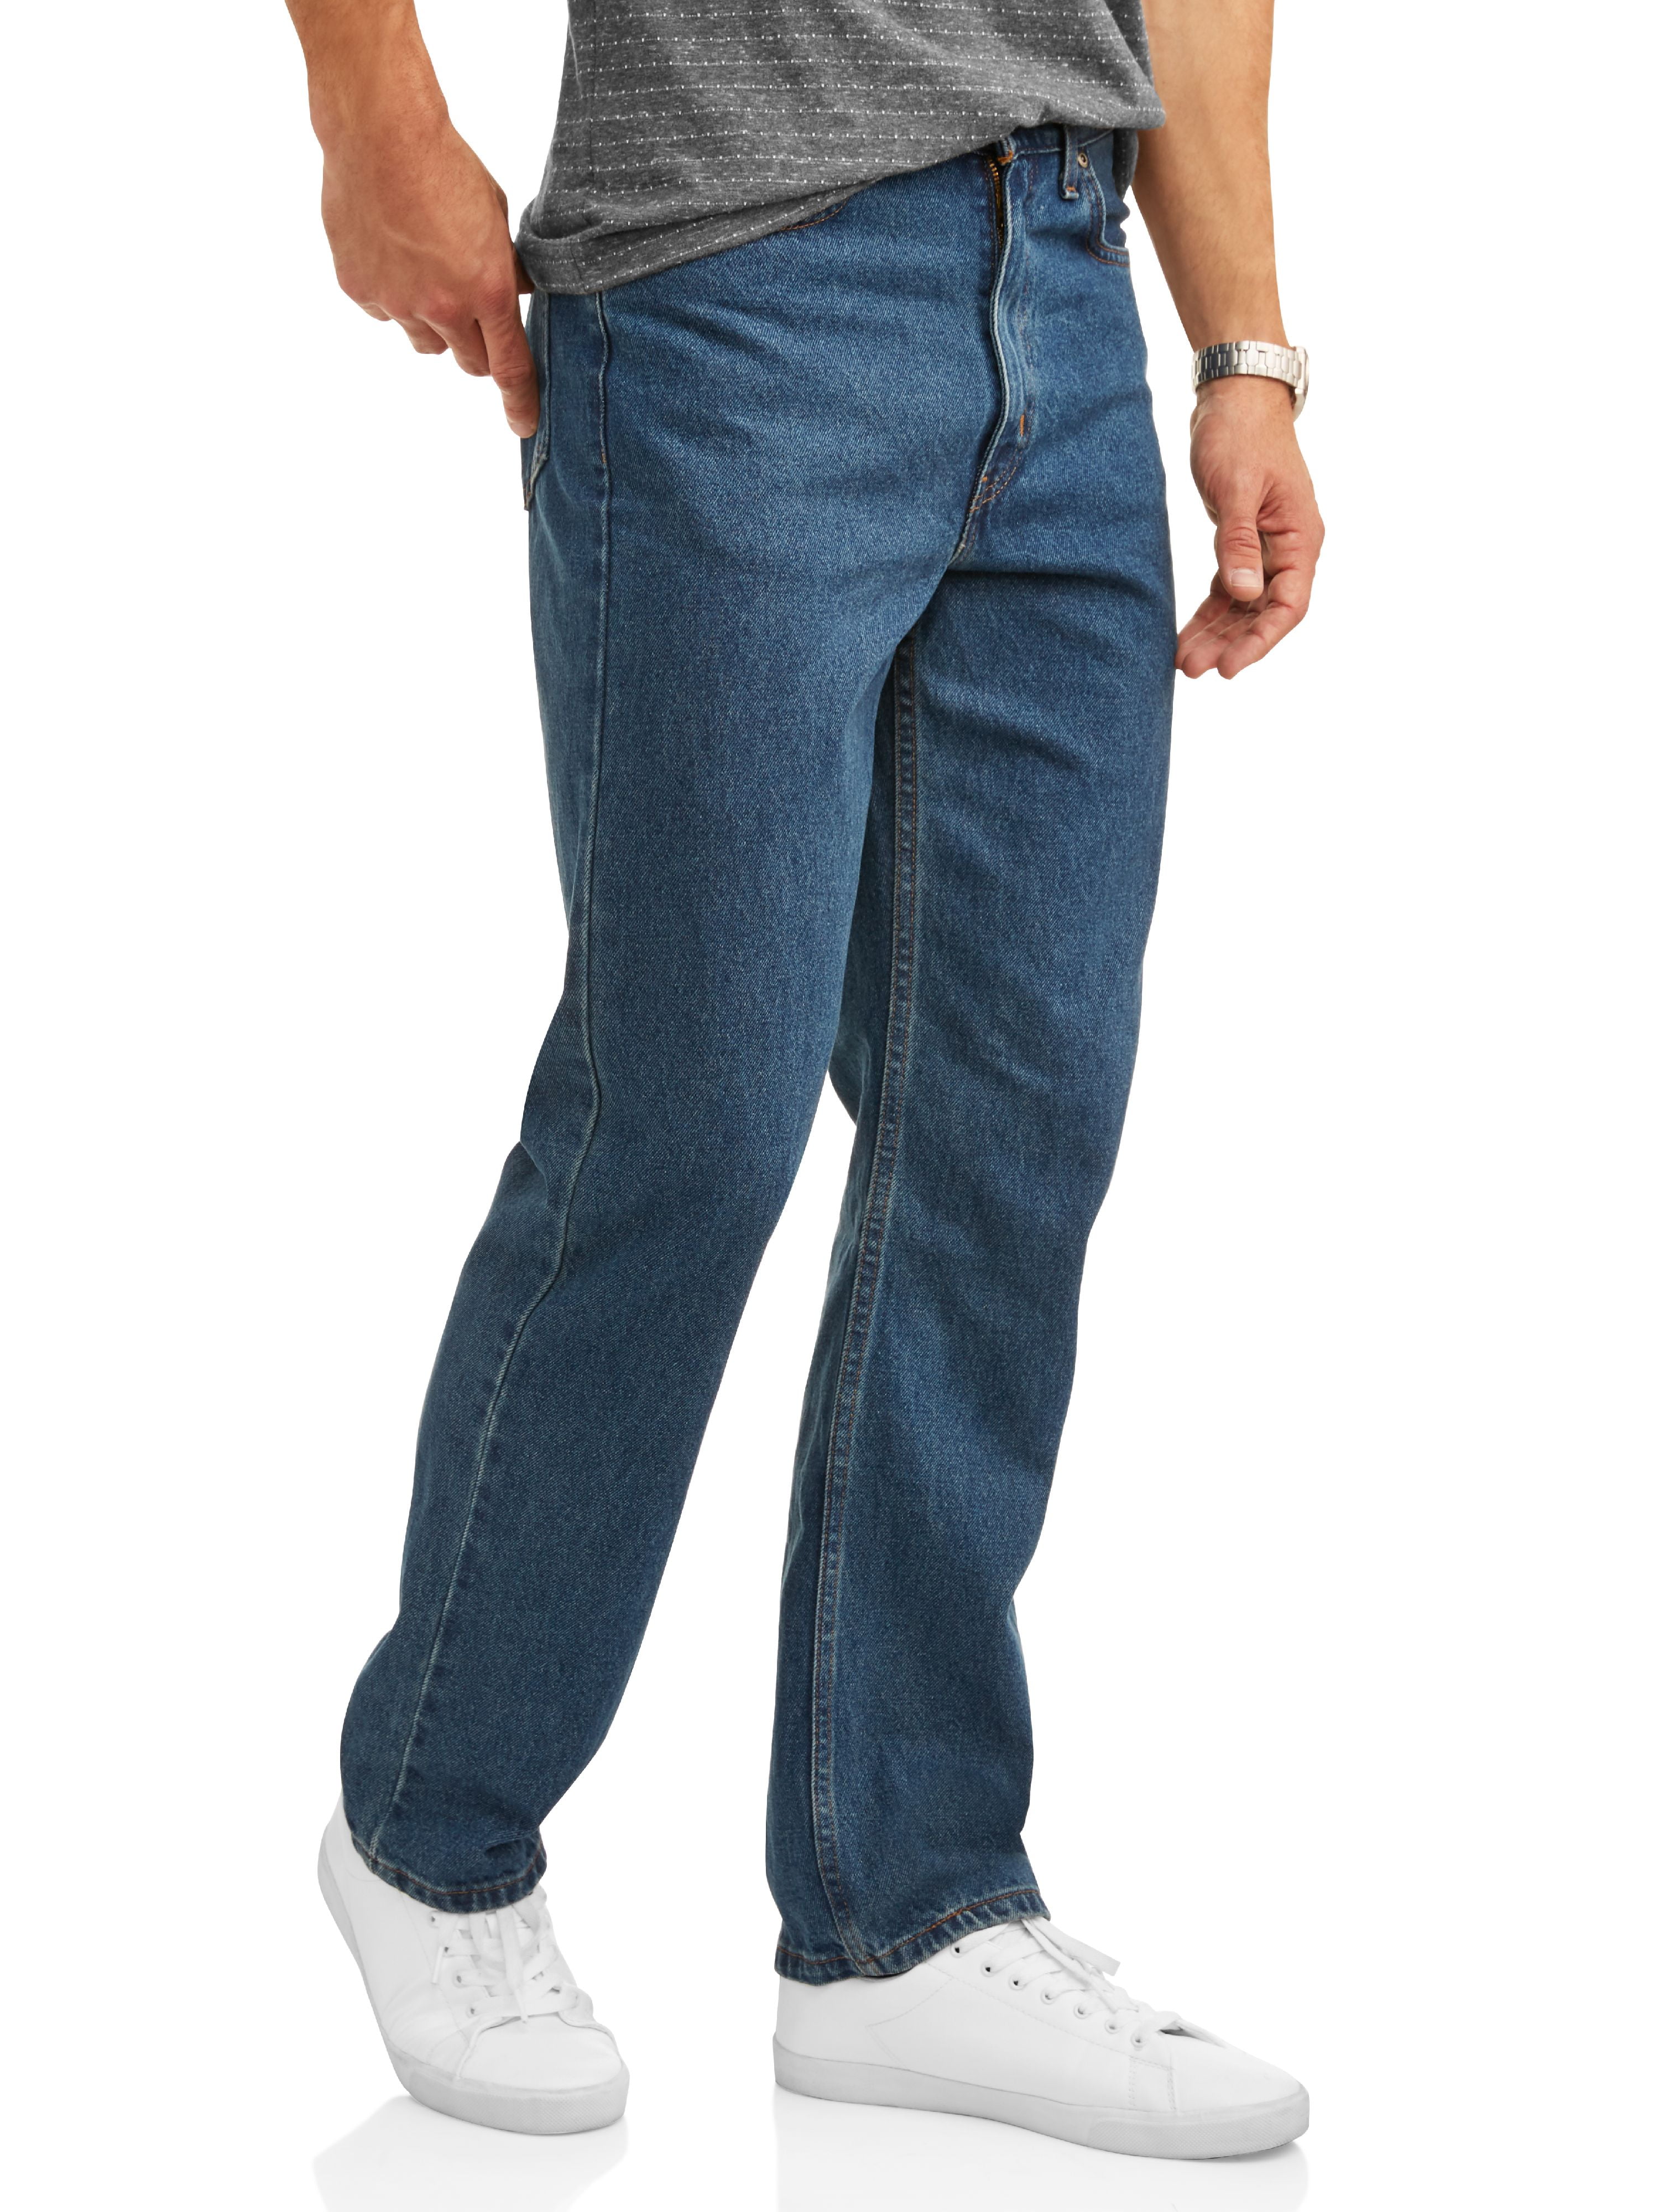 George Men's and Big 100% Cotton Relaxed Fit Walmart.com